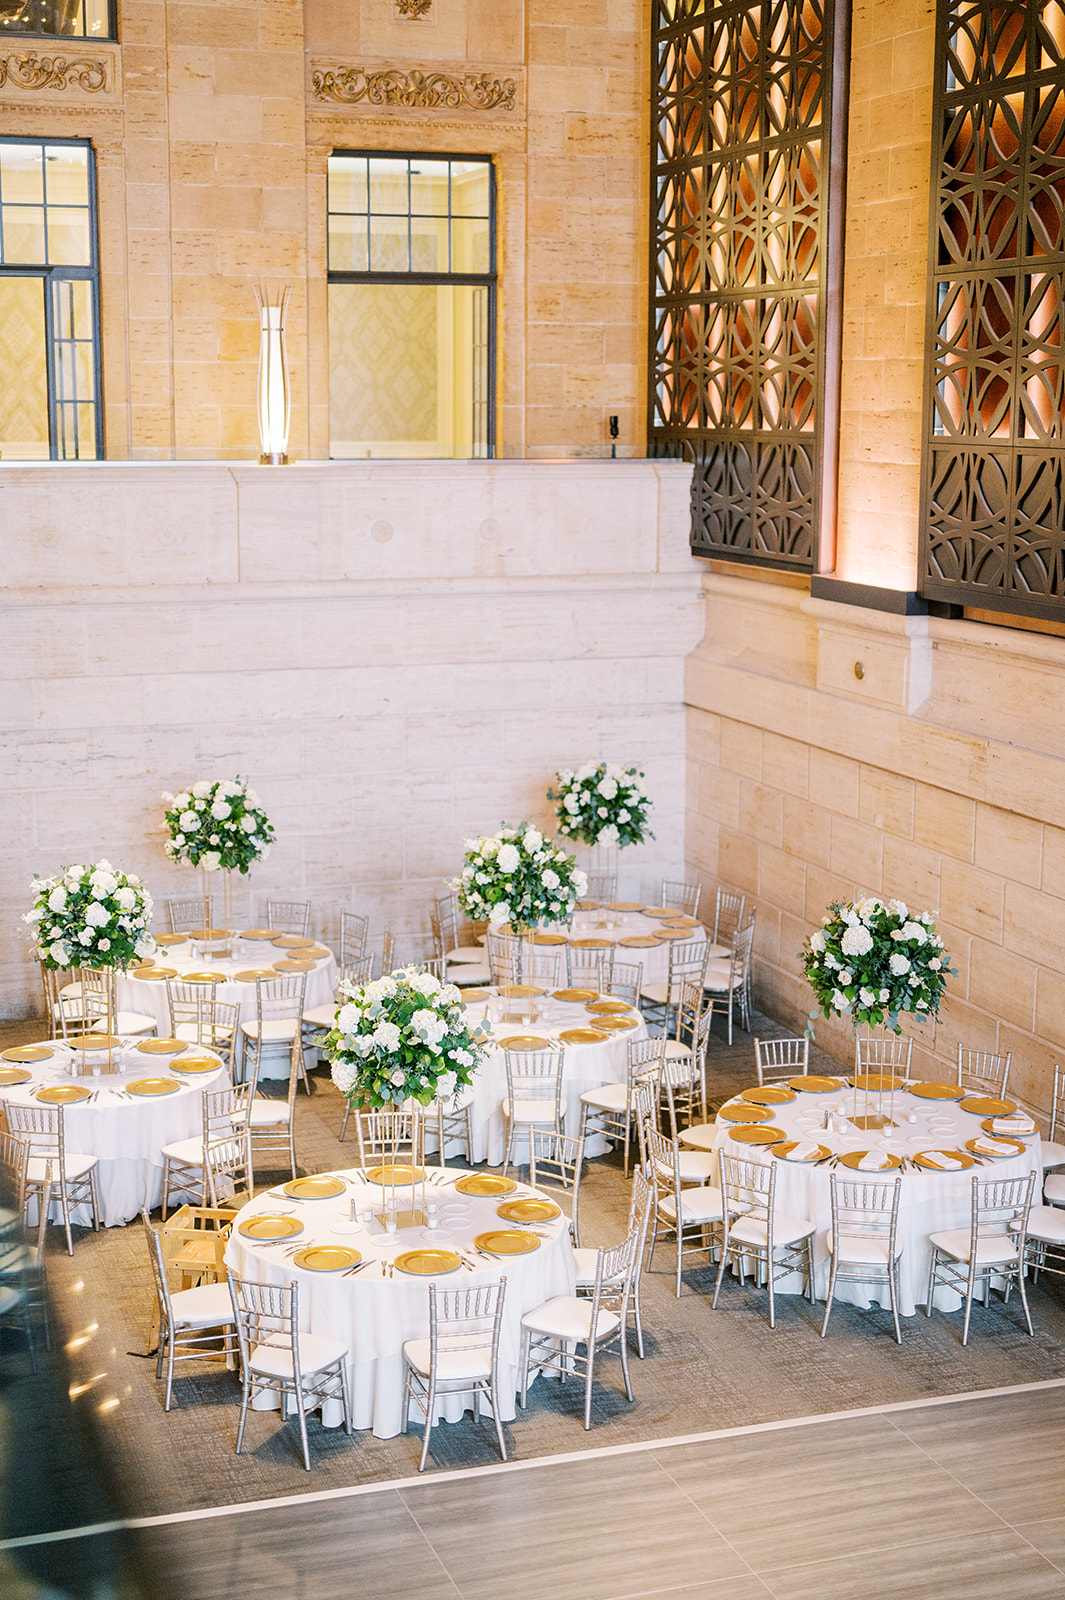 Reception decor in white and green for Classic Airy Winter Wedding at Philadelphia's Historic Union Trust